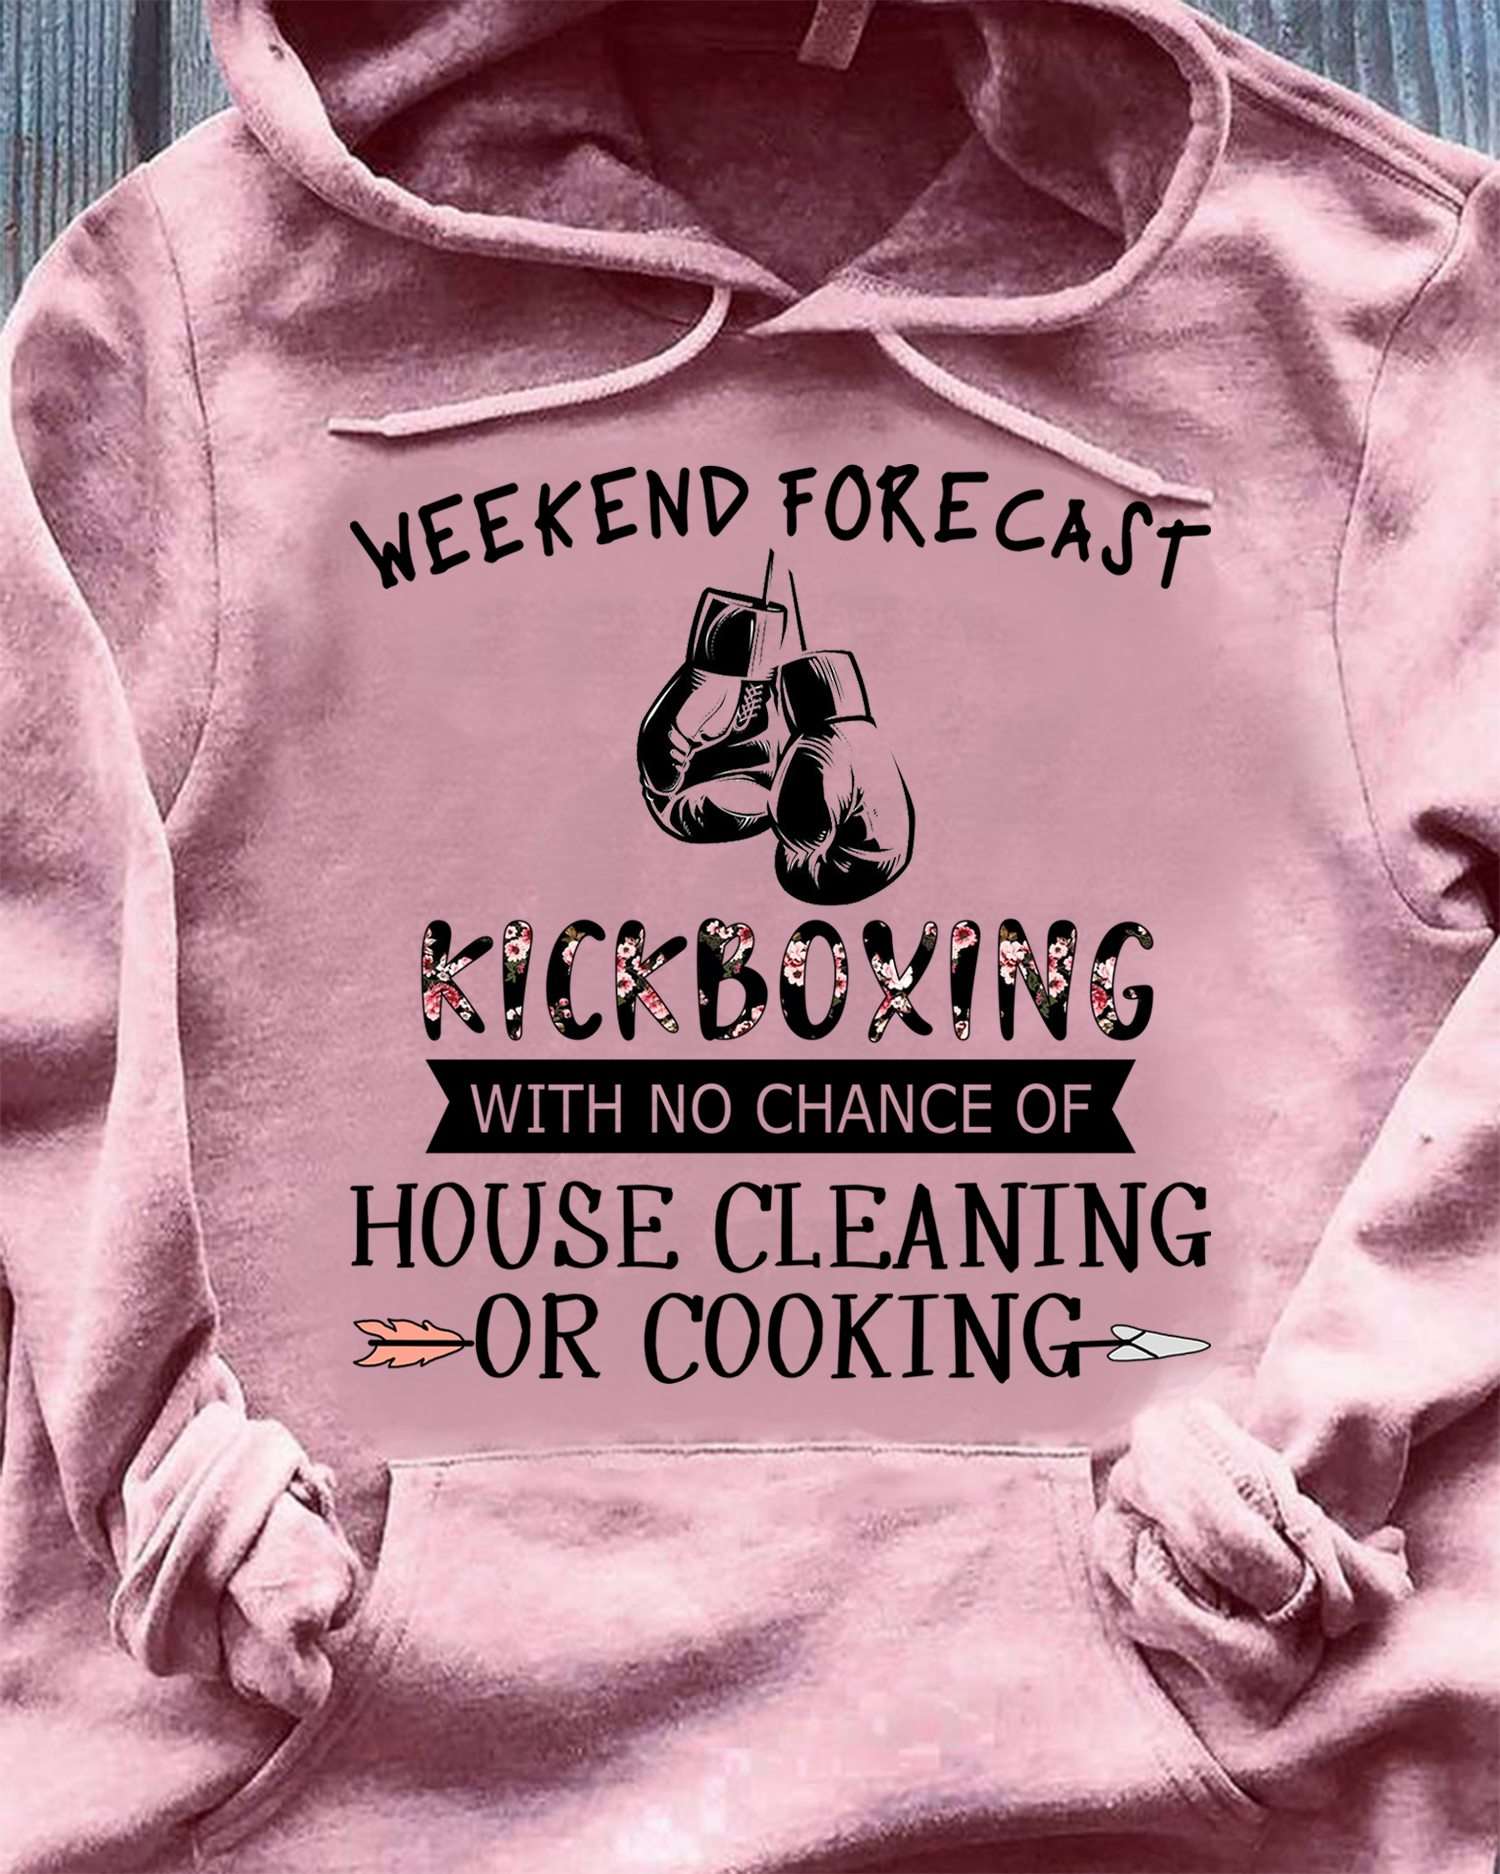 Weekend forecast kickboxing with no chance of house cleaning or cooking - Love kickboxing